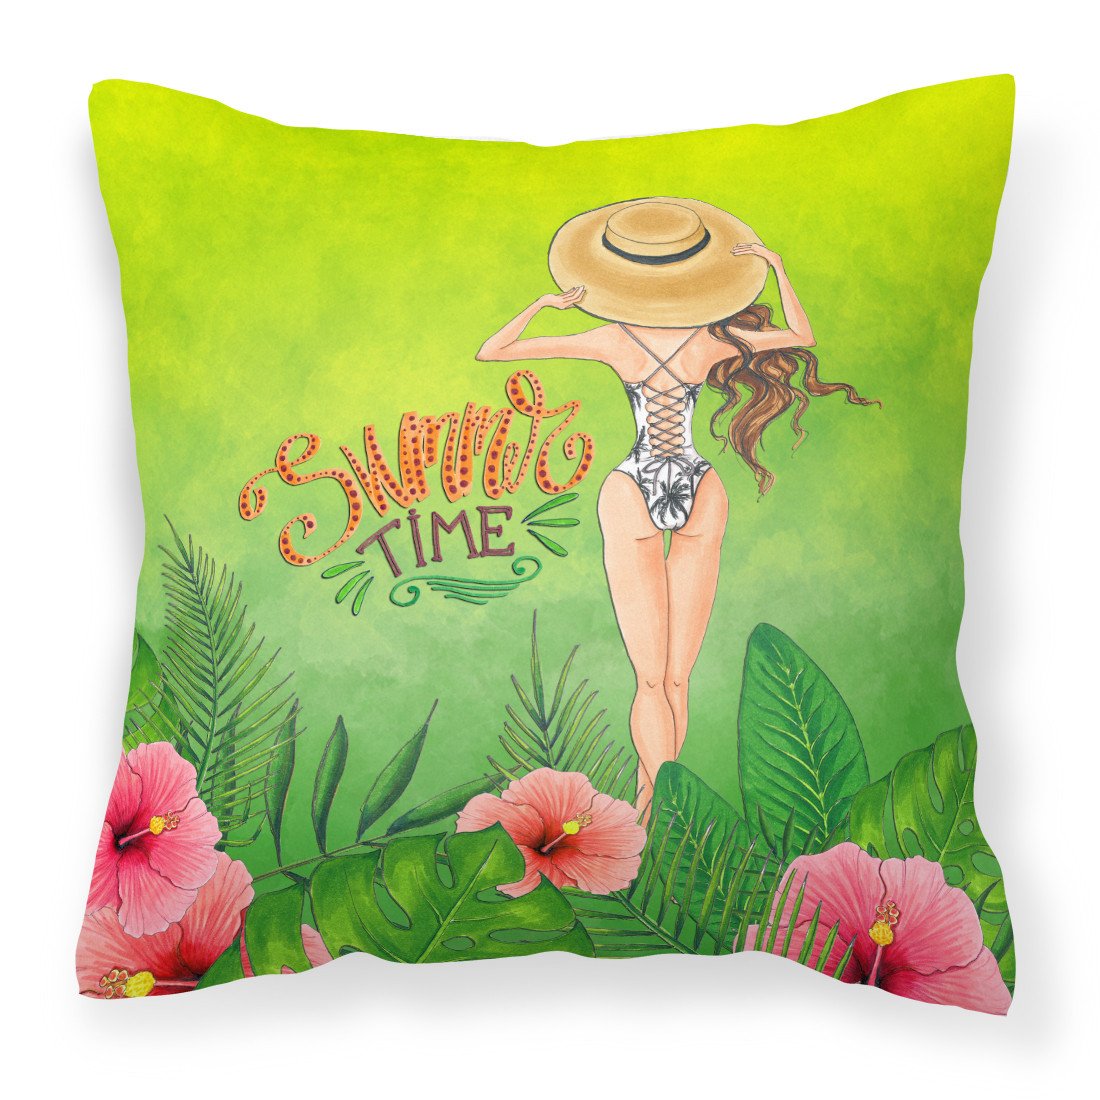 Summer Time Lady in Swimsuit Fabric Decorative Pillow BB7455PW1818 by Caroline's Treasures